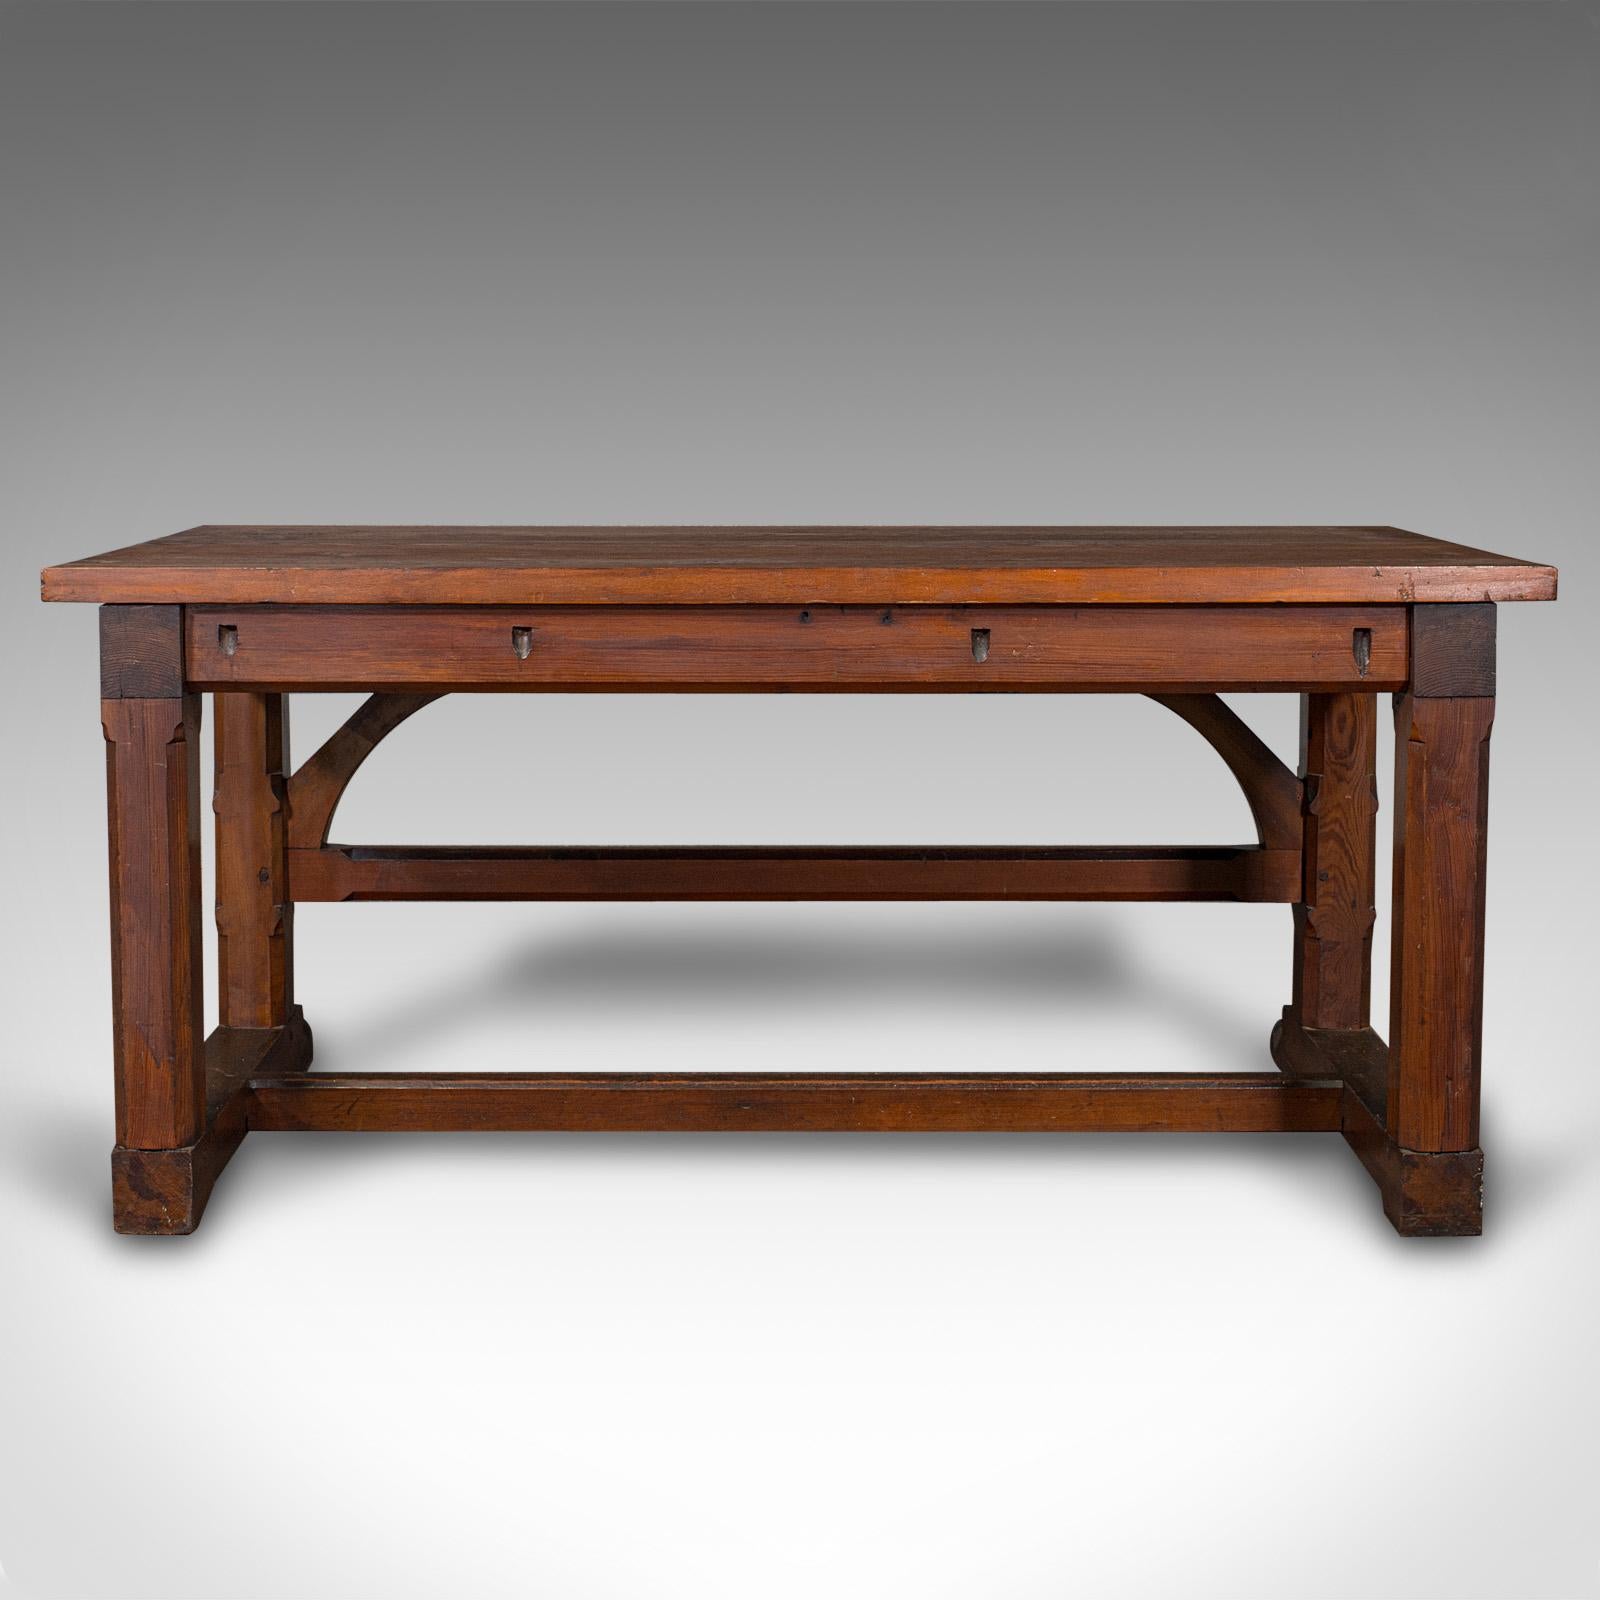 Antique Serving Table, English, Pitch Pine, Pugin, Ecclesiastical, Victorian In Good Condition For Sale In Hele, Devon, GB